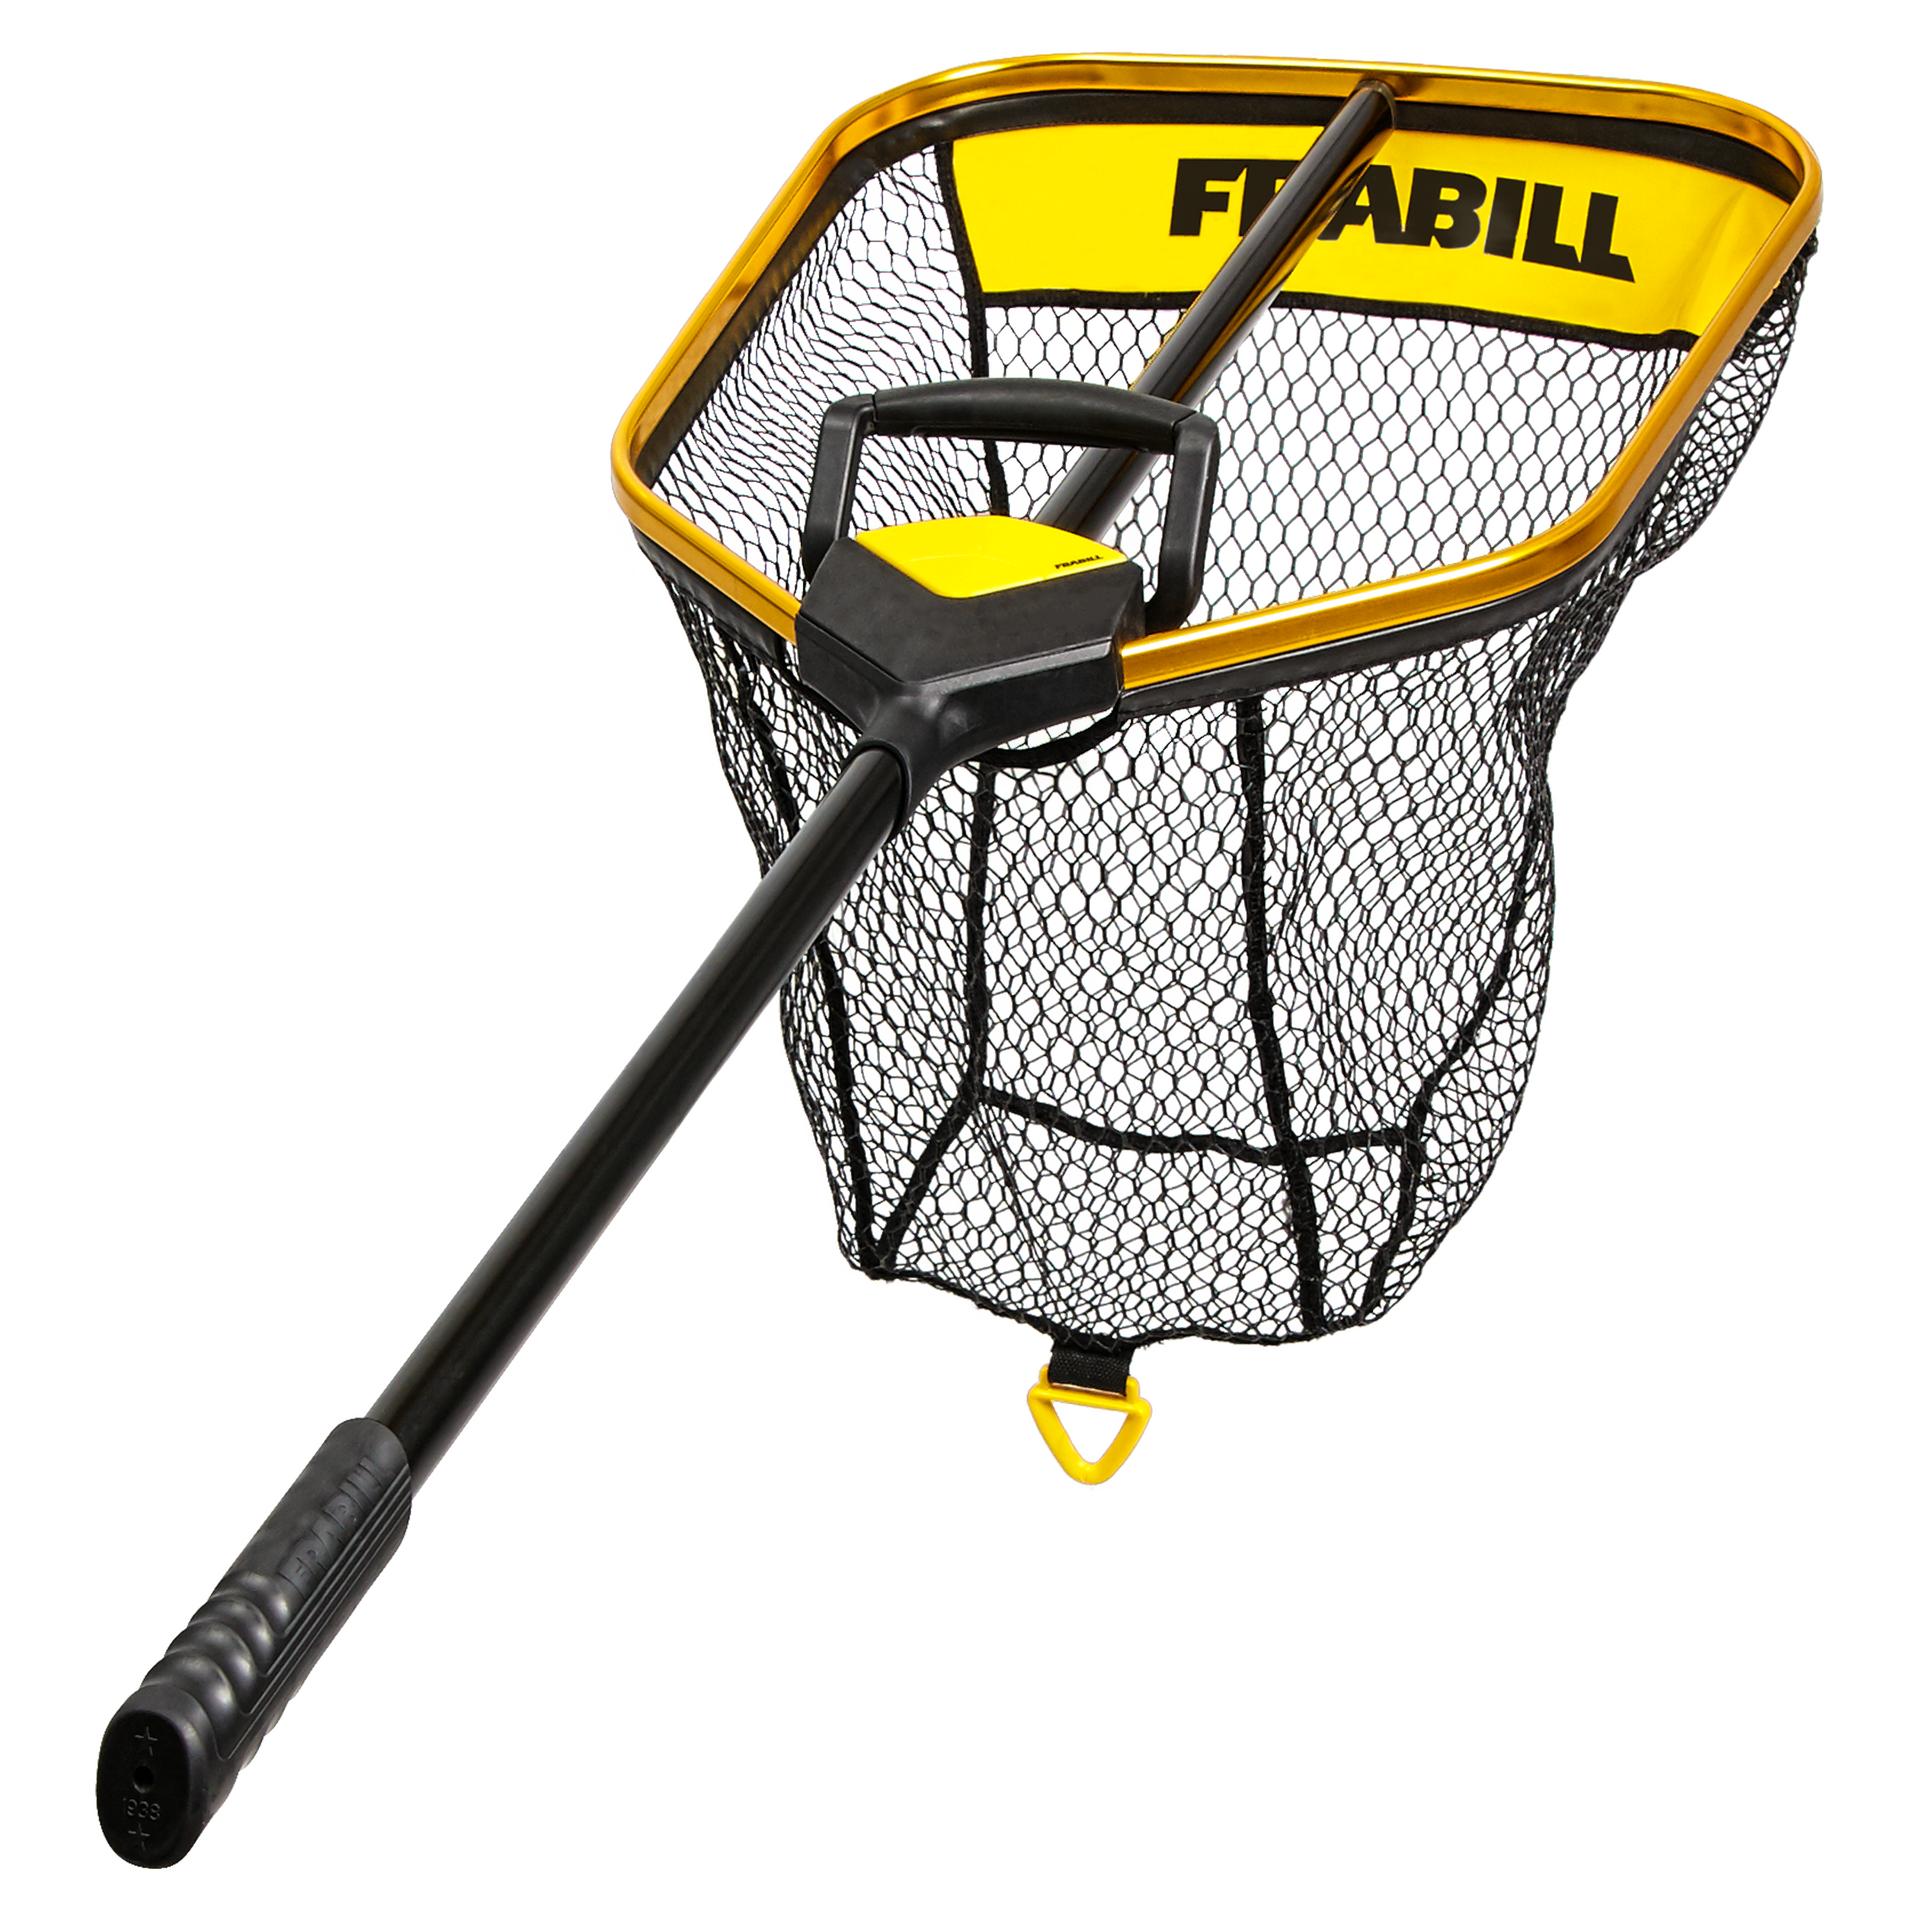 Buy Frabill Trophy Haul 2427 Fishing Net, Black and Gold (FRBNX24S